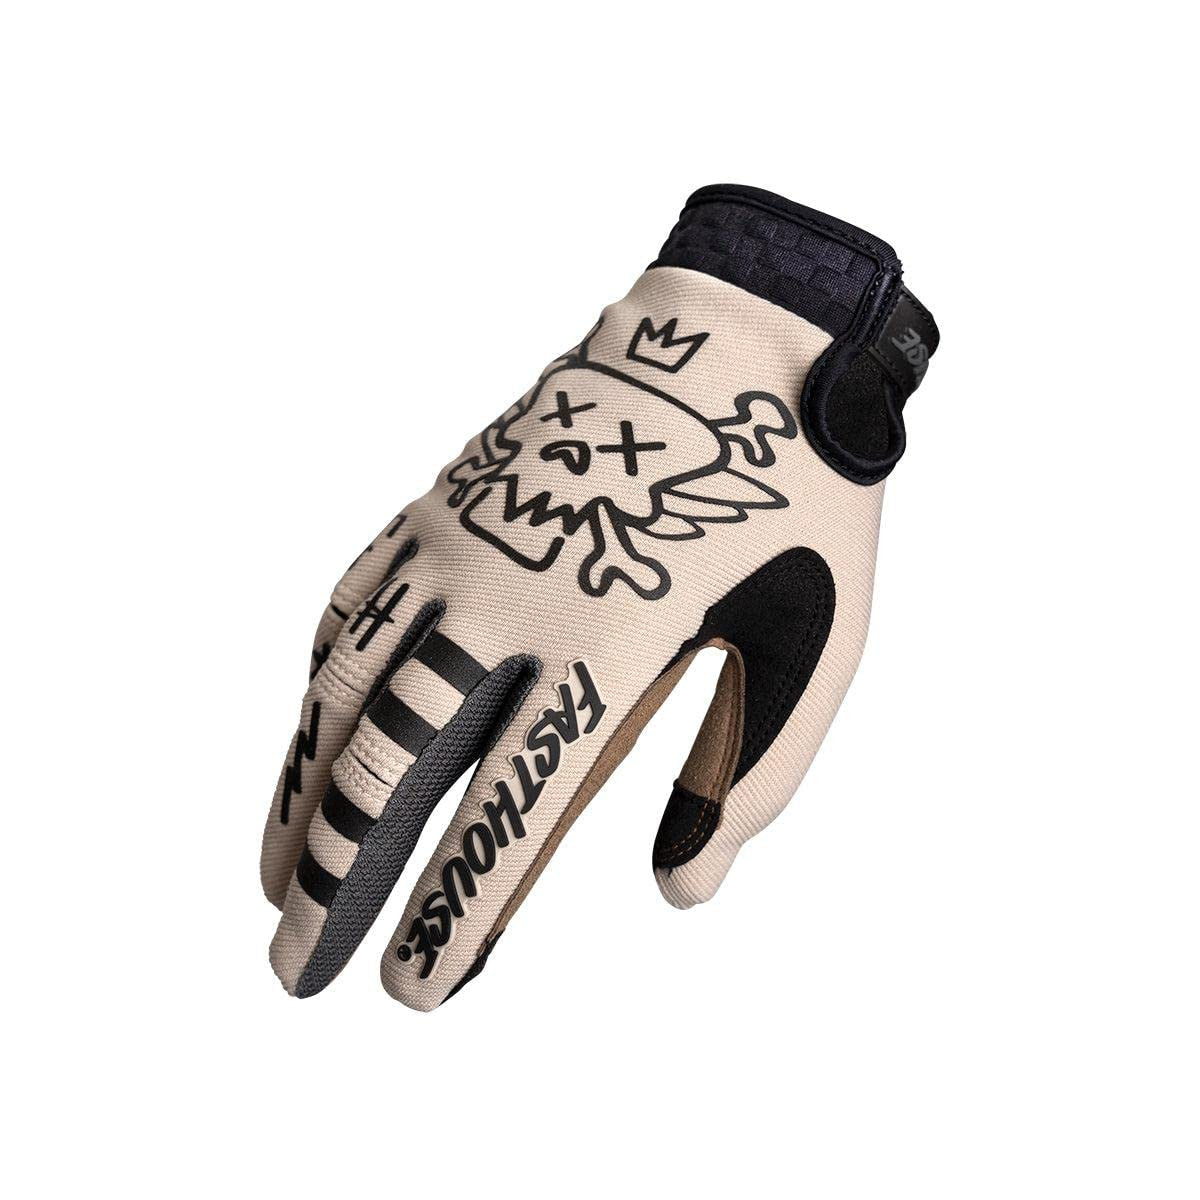 Fasthouse Youth Speed Style Glove Stomp - Cream Bike Gloves